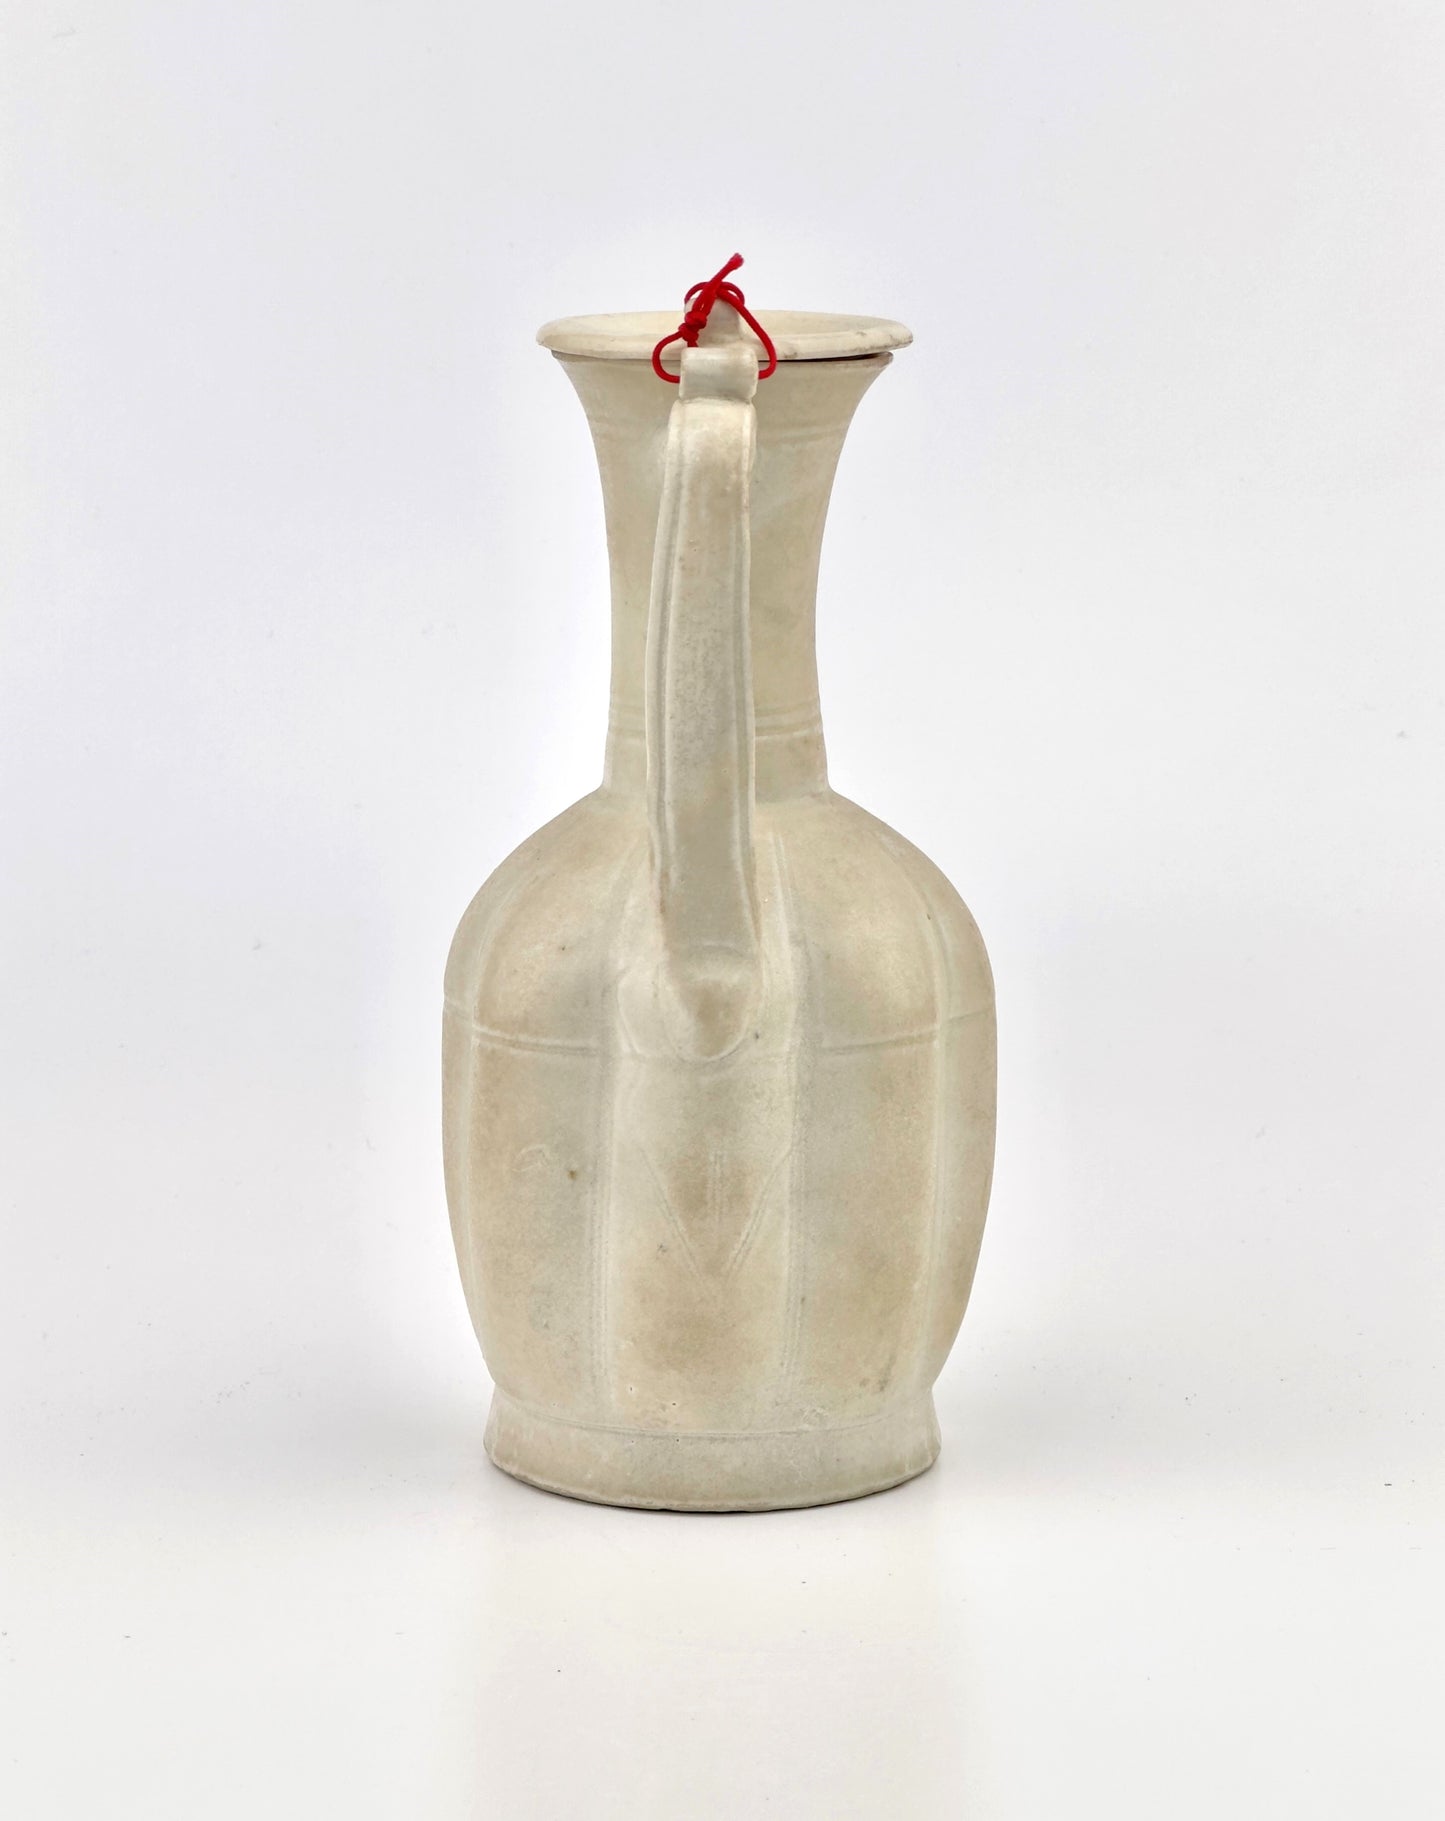 RARE CREAM GLAZED EWER AND COVER, SONG DYNASTY (960–1279)